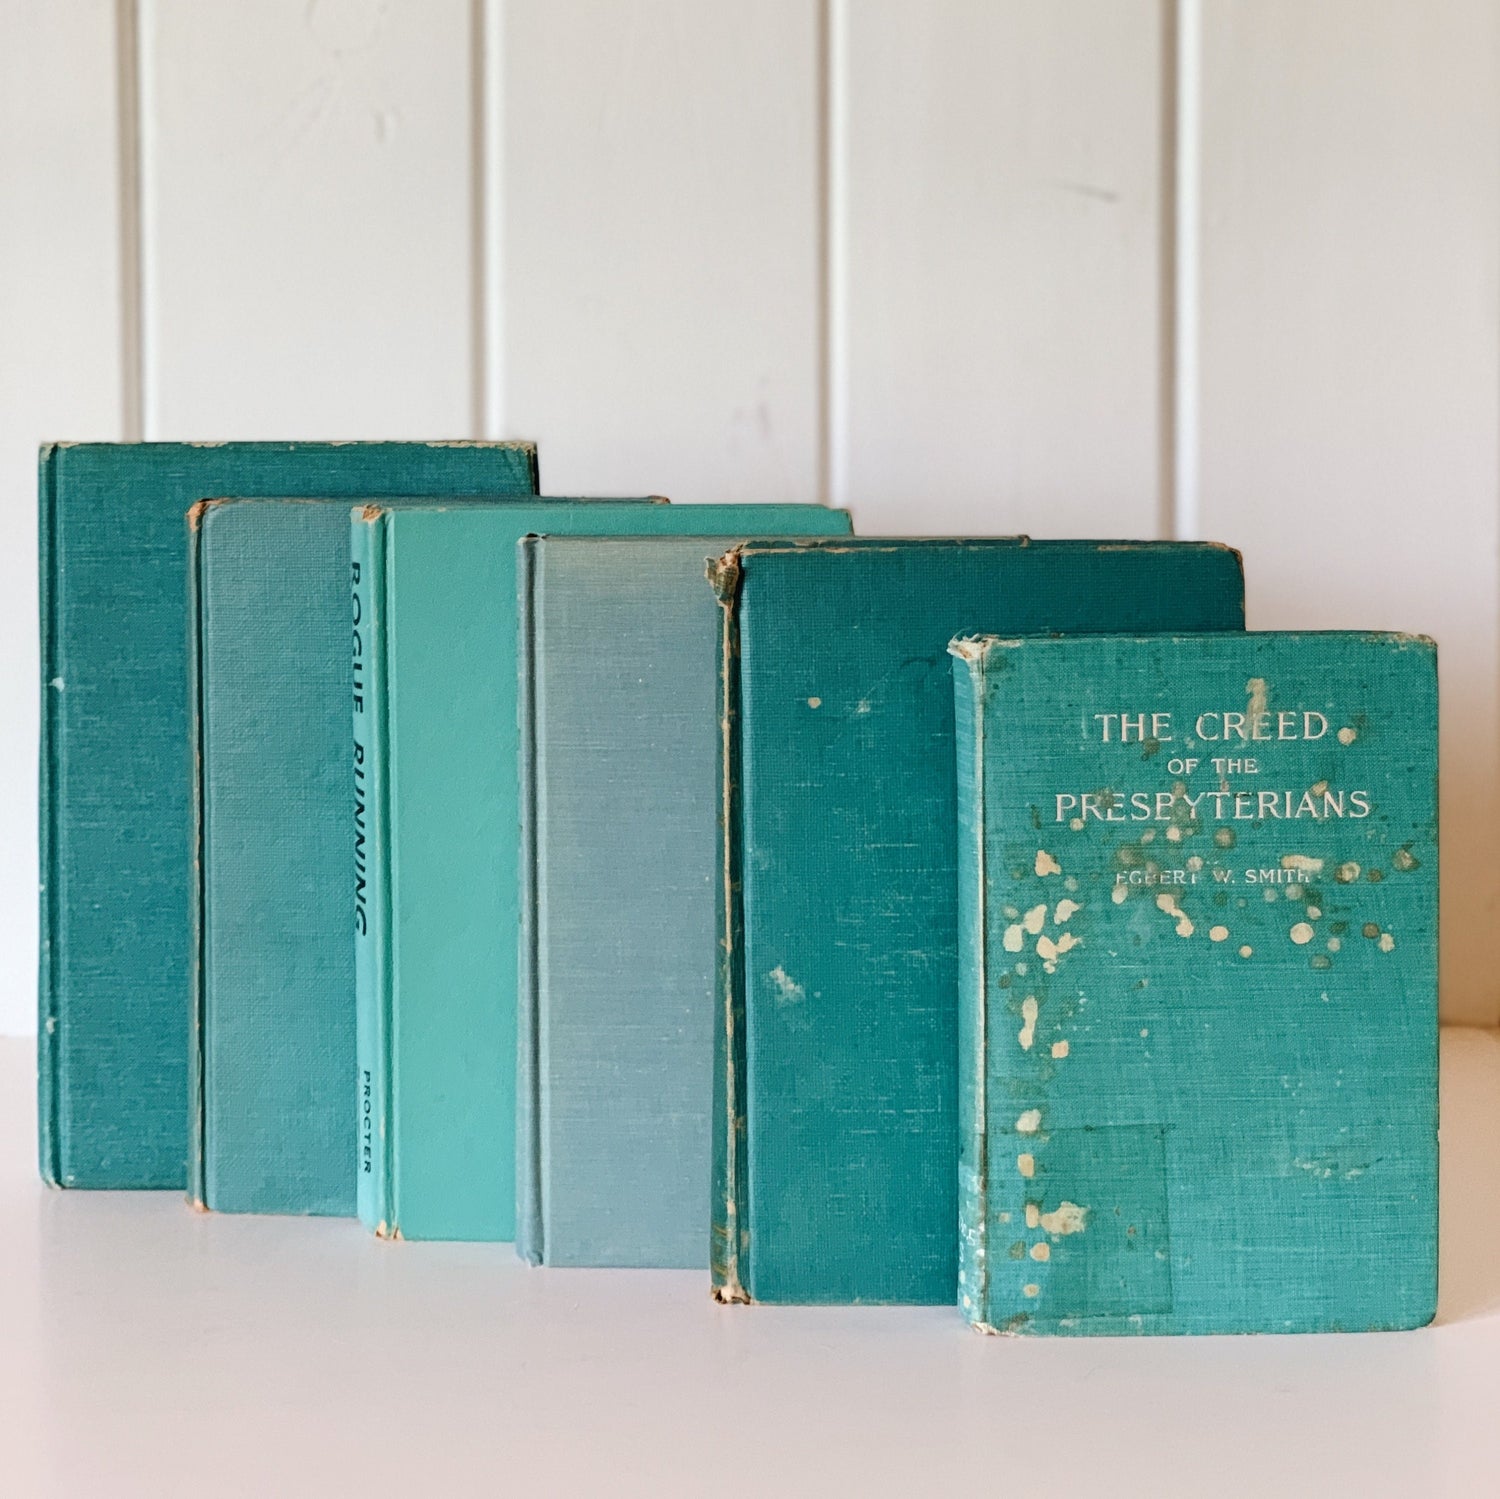 Shabby Chic Vintage Teal Green Book Bundle, Books by Color